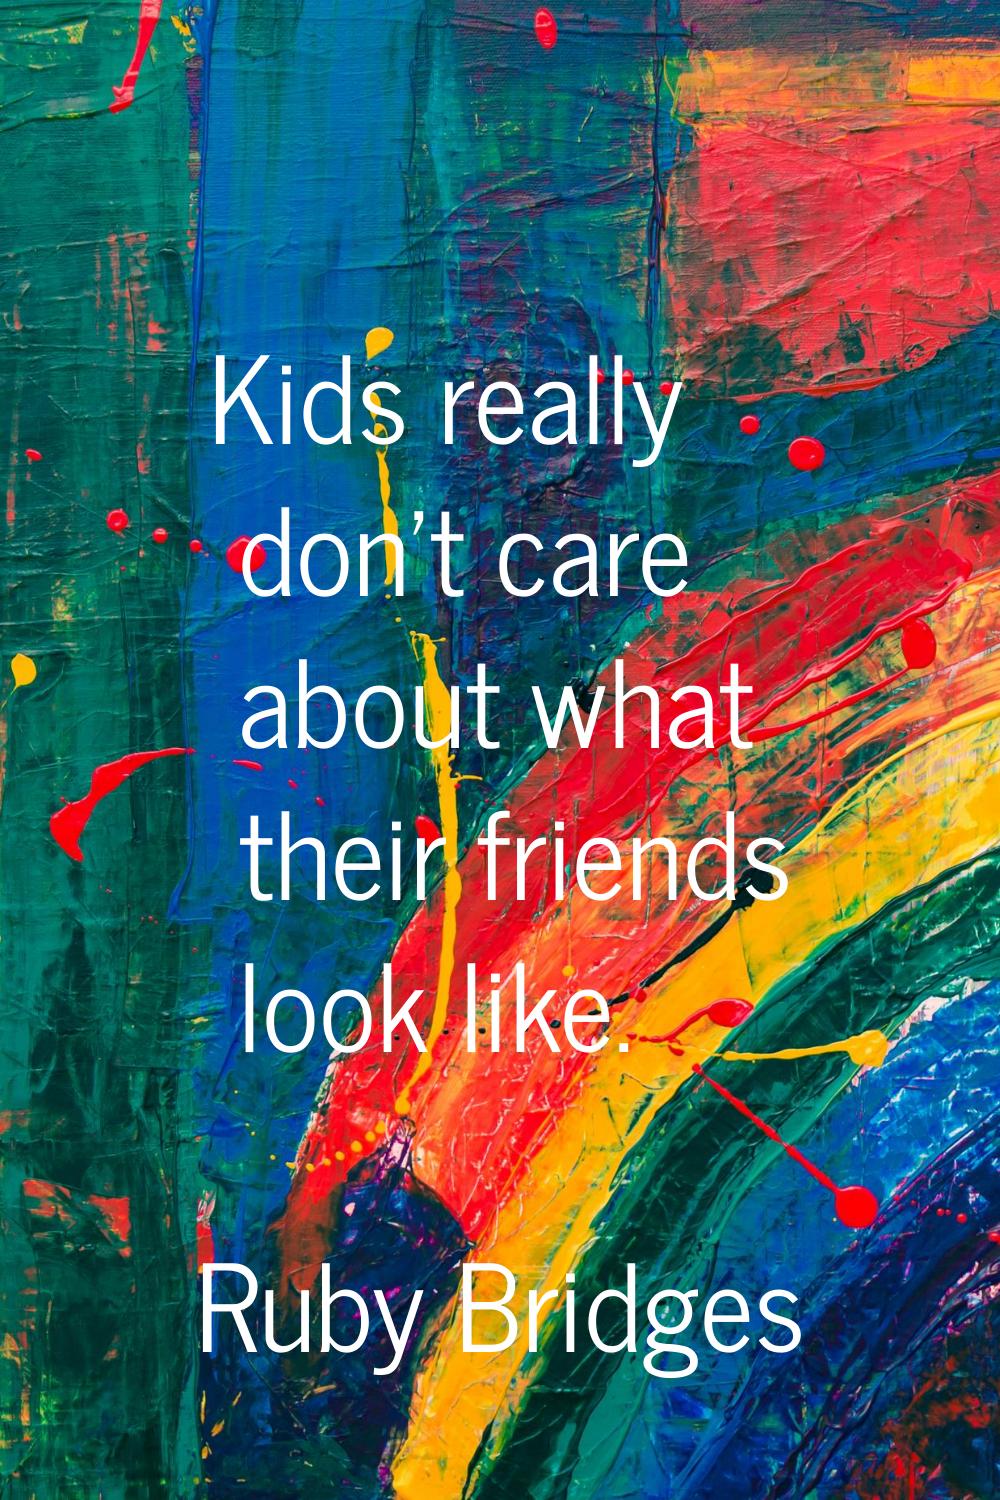 Kids really don't care about what their friends look like.